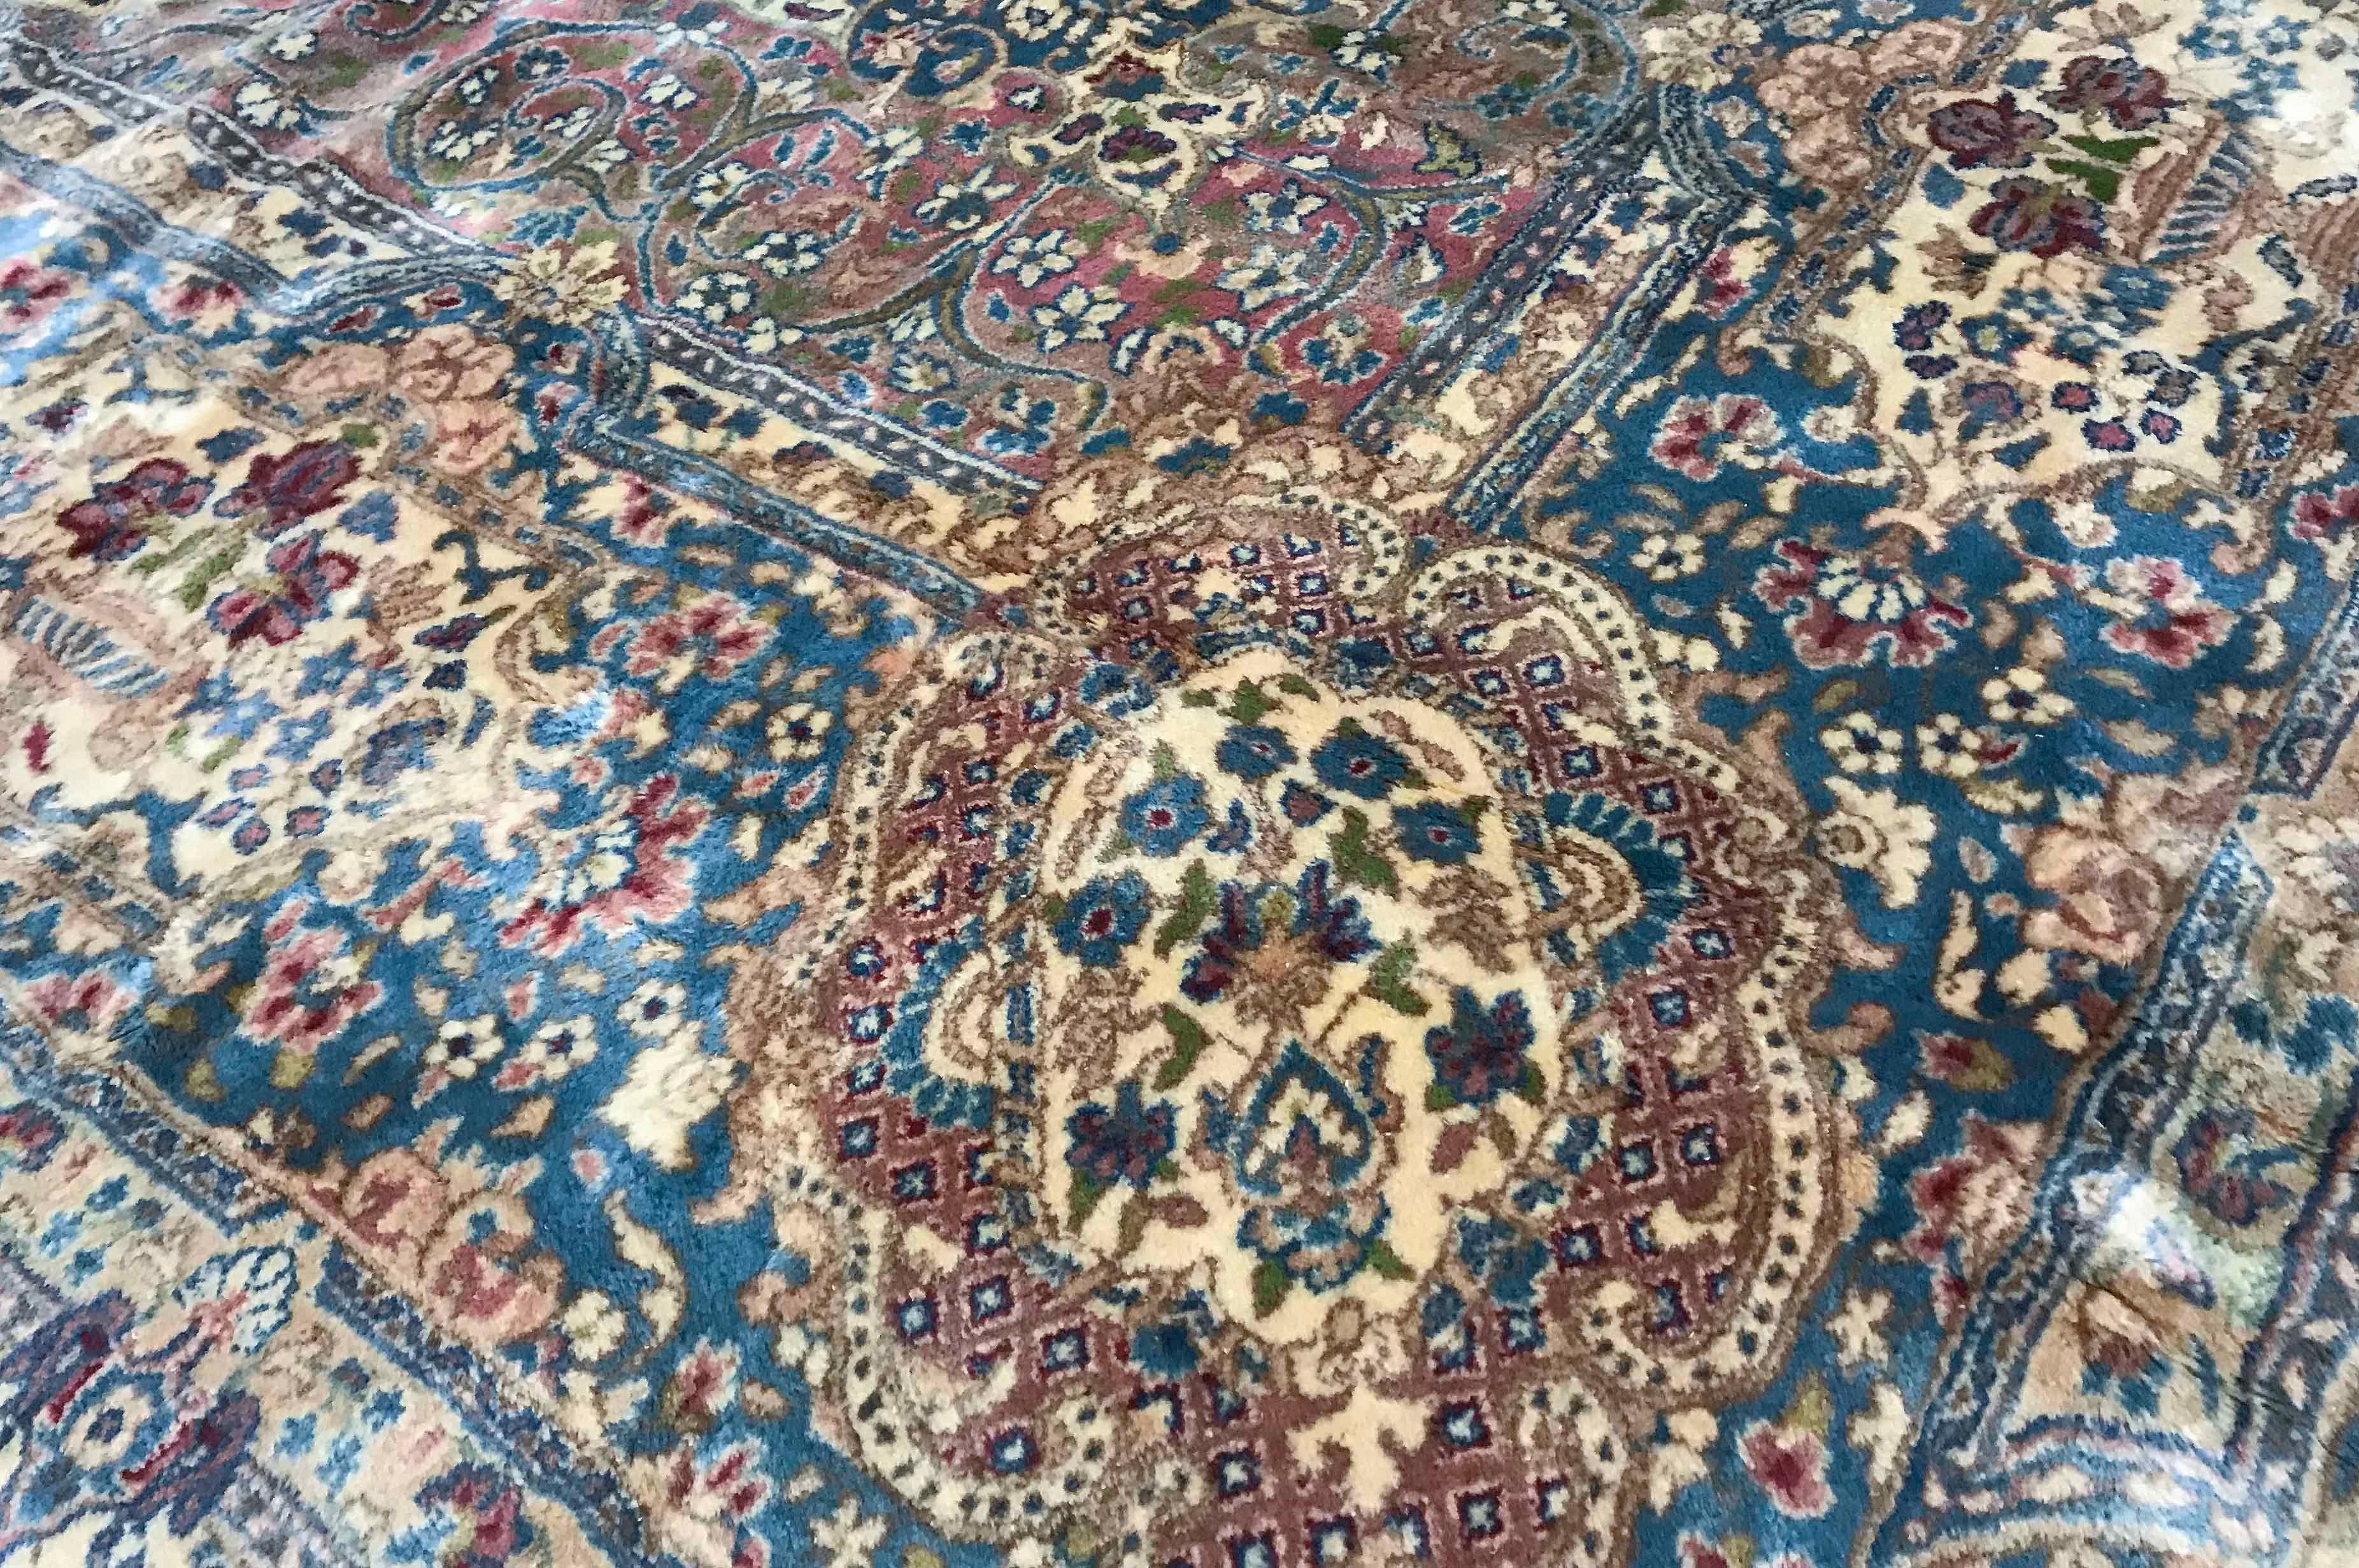 Vintage Persian Kerman rug, circa 1940. The soft ivory ground is the setting for this picturesque rug with a central medallion which blue colors and style is repeated in the borders to create this large but gentle looking rug. Size: 12'6 x 21'.